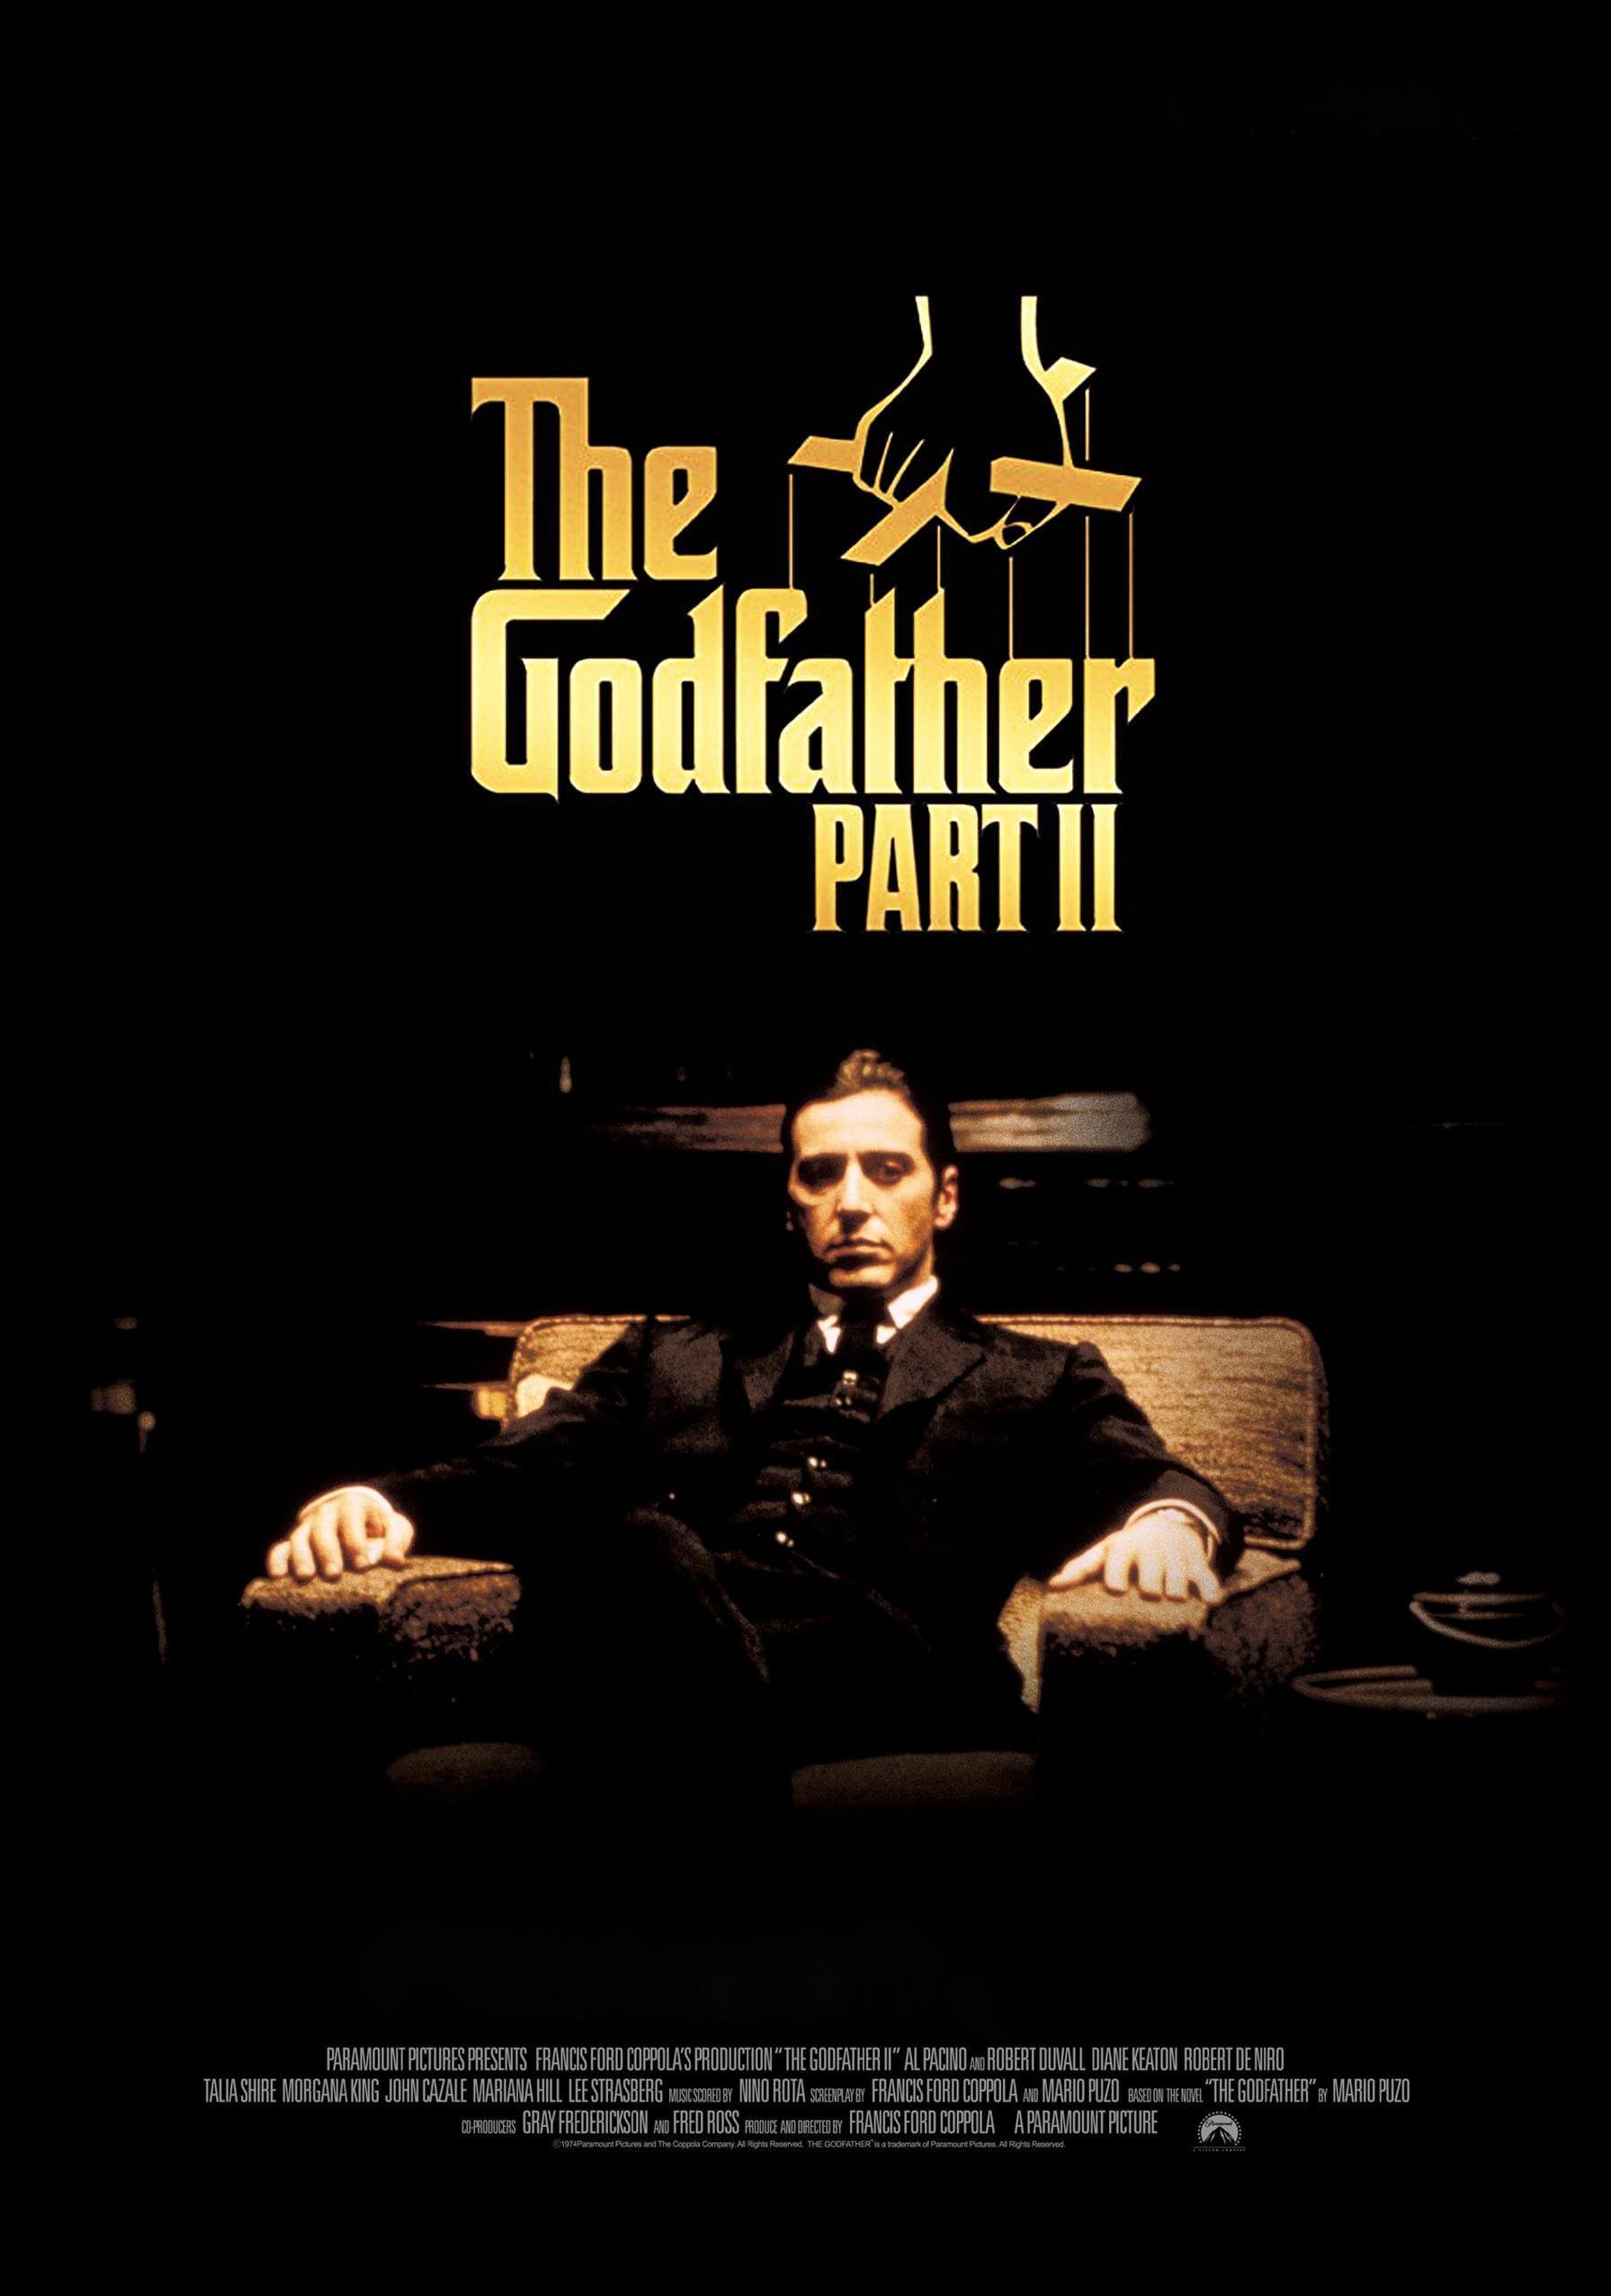 Godfather Ii Al Pacino Tallenge Hollywood Cult Classics Movie Poster Life Size Posters By Tim Buy Posters Frames Canvas Digital Art Prints Small Compact Medium And Large Variants